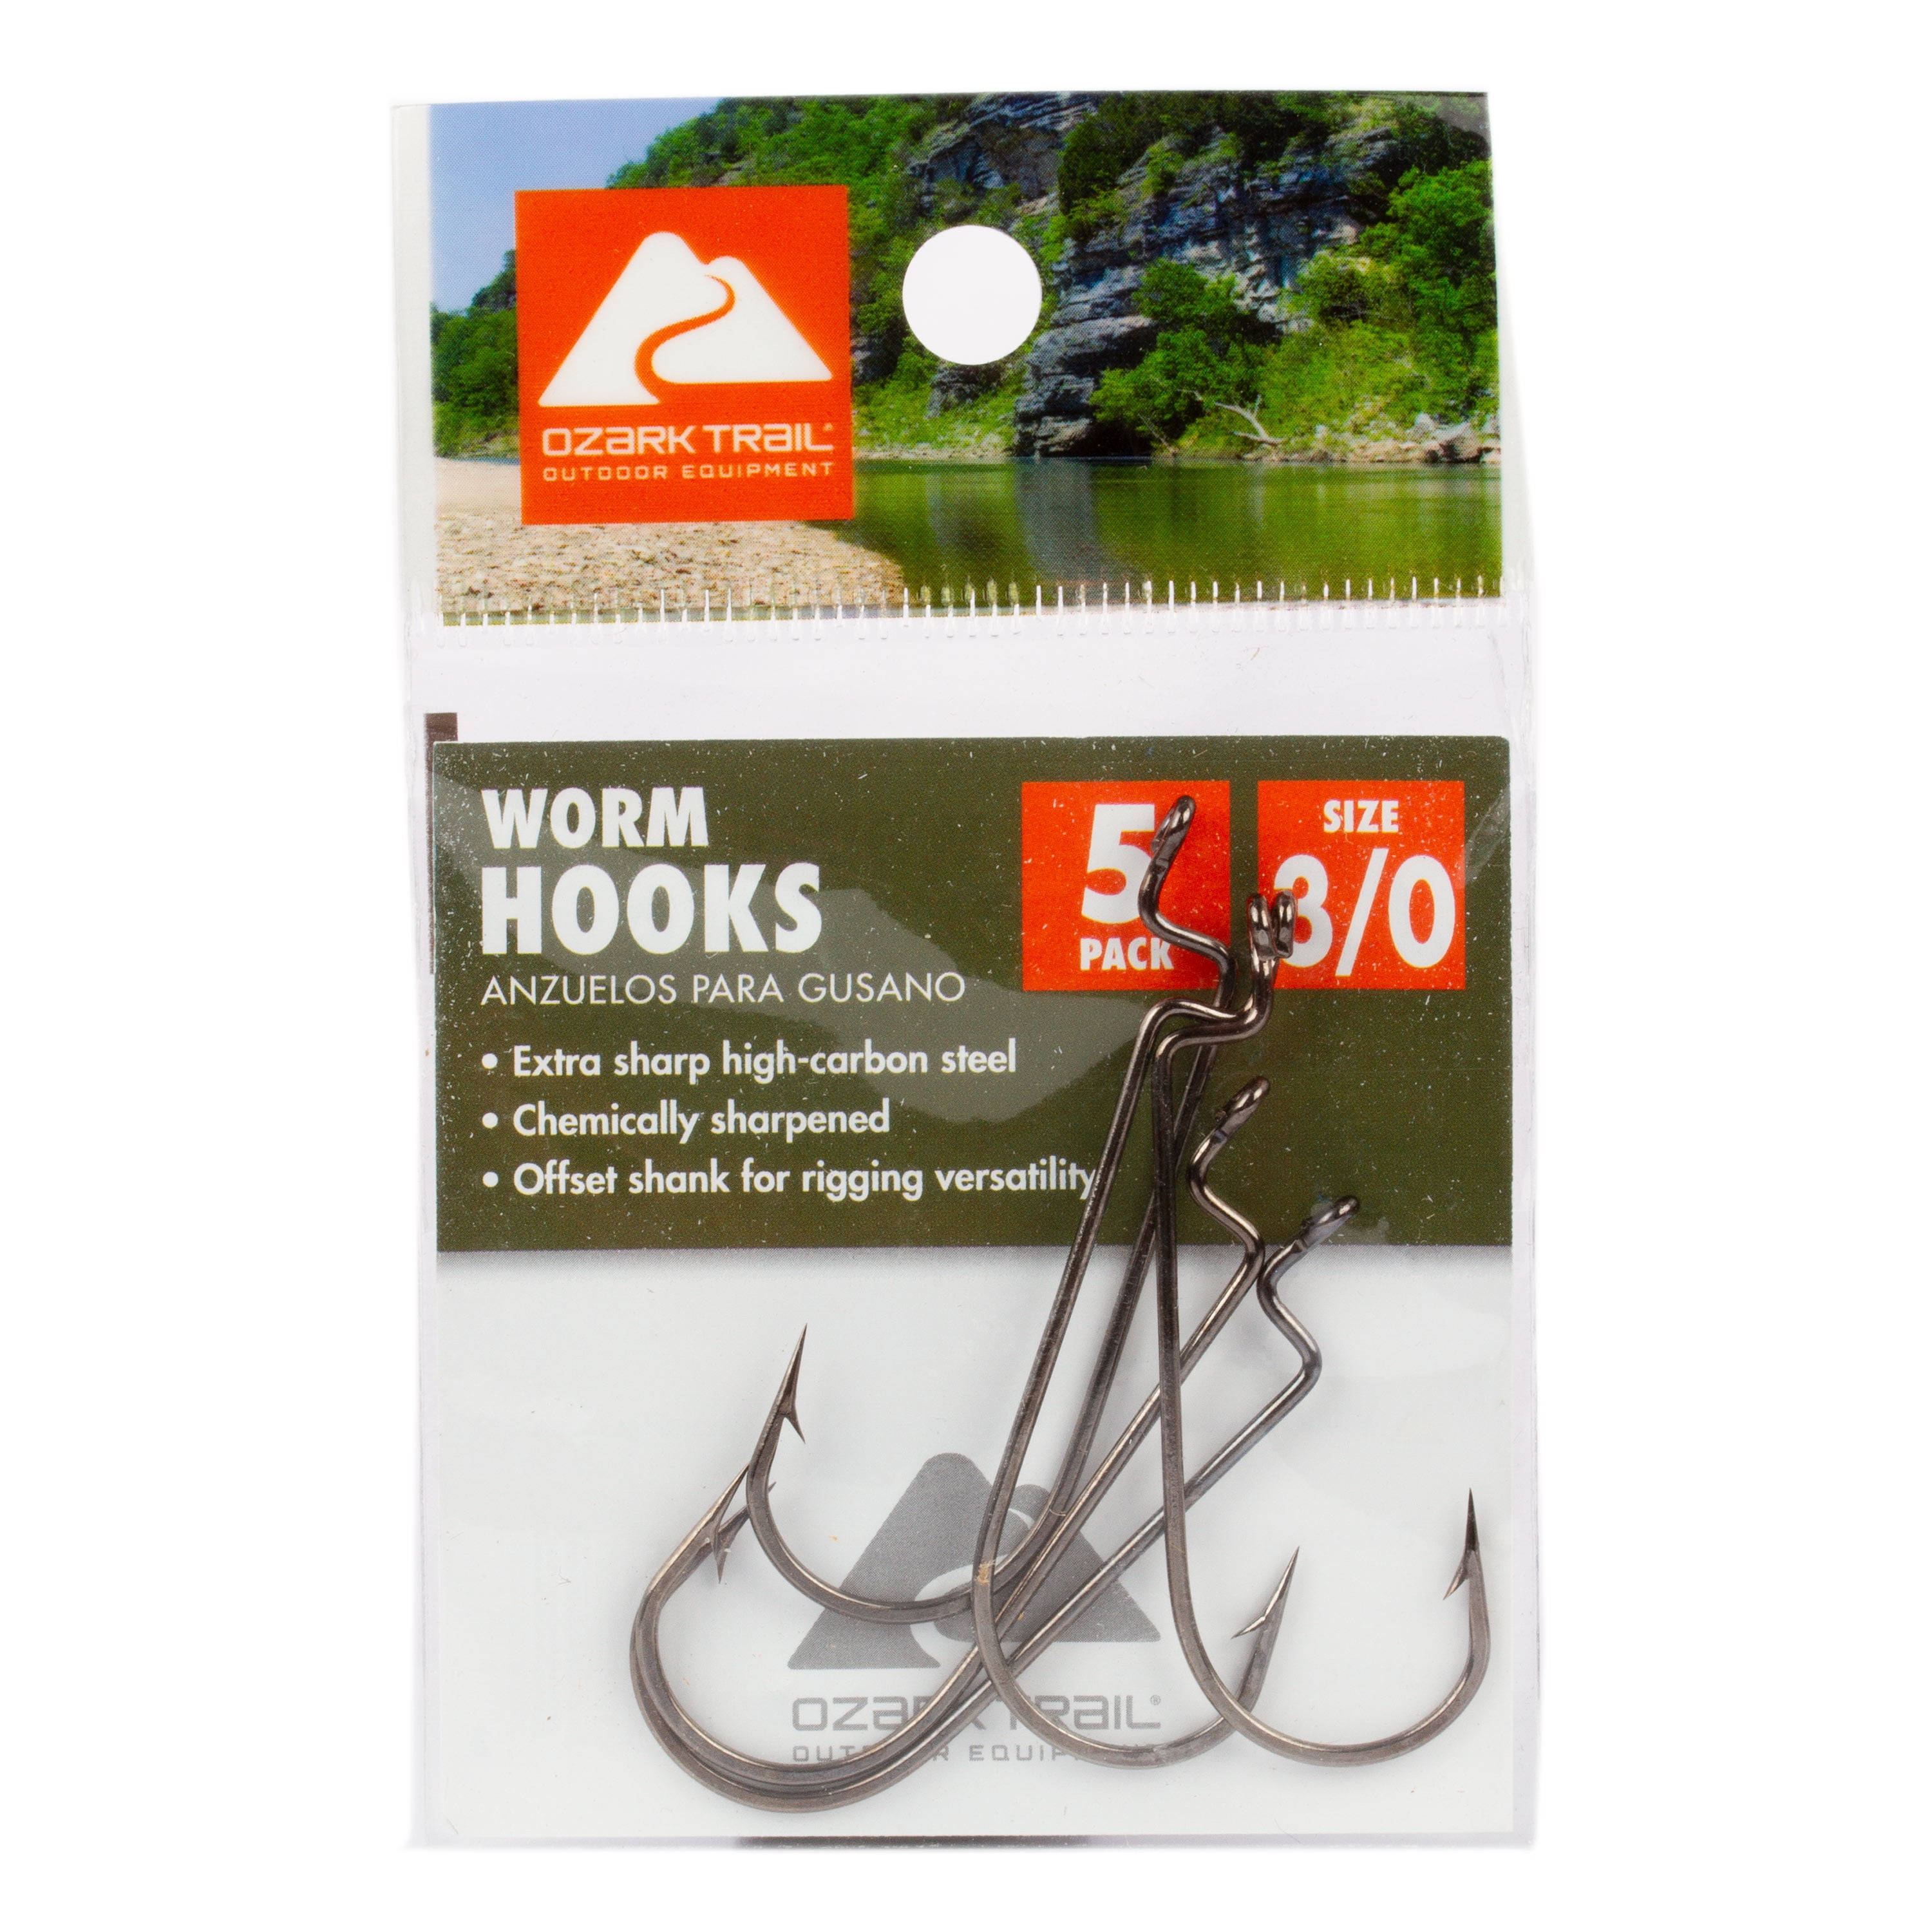 Granite Outdoors Premium High Carbon Steel Round Bend Worm Fishing Hooks  Size1/0 